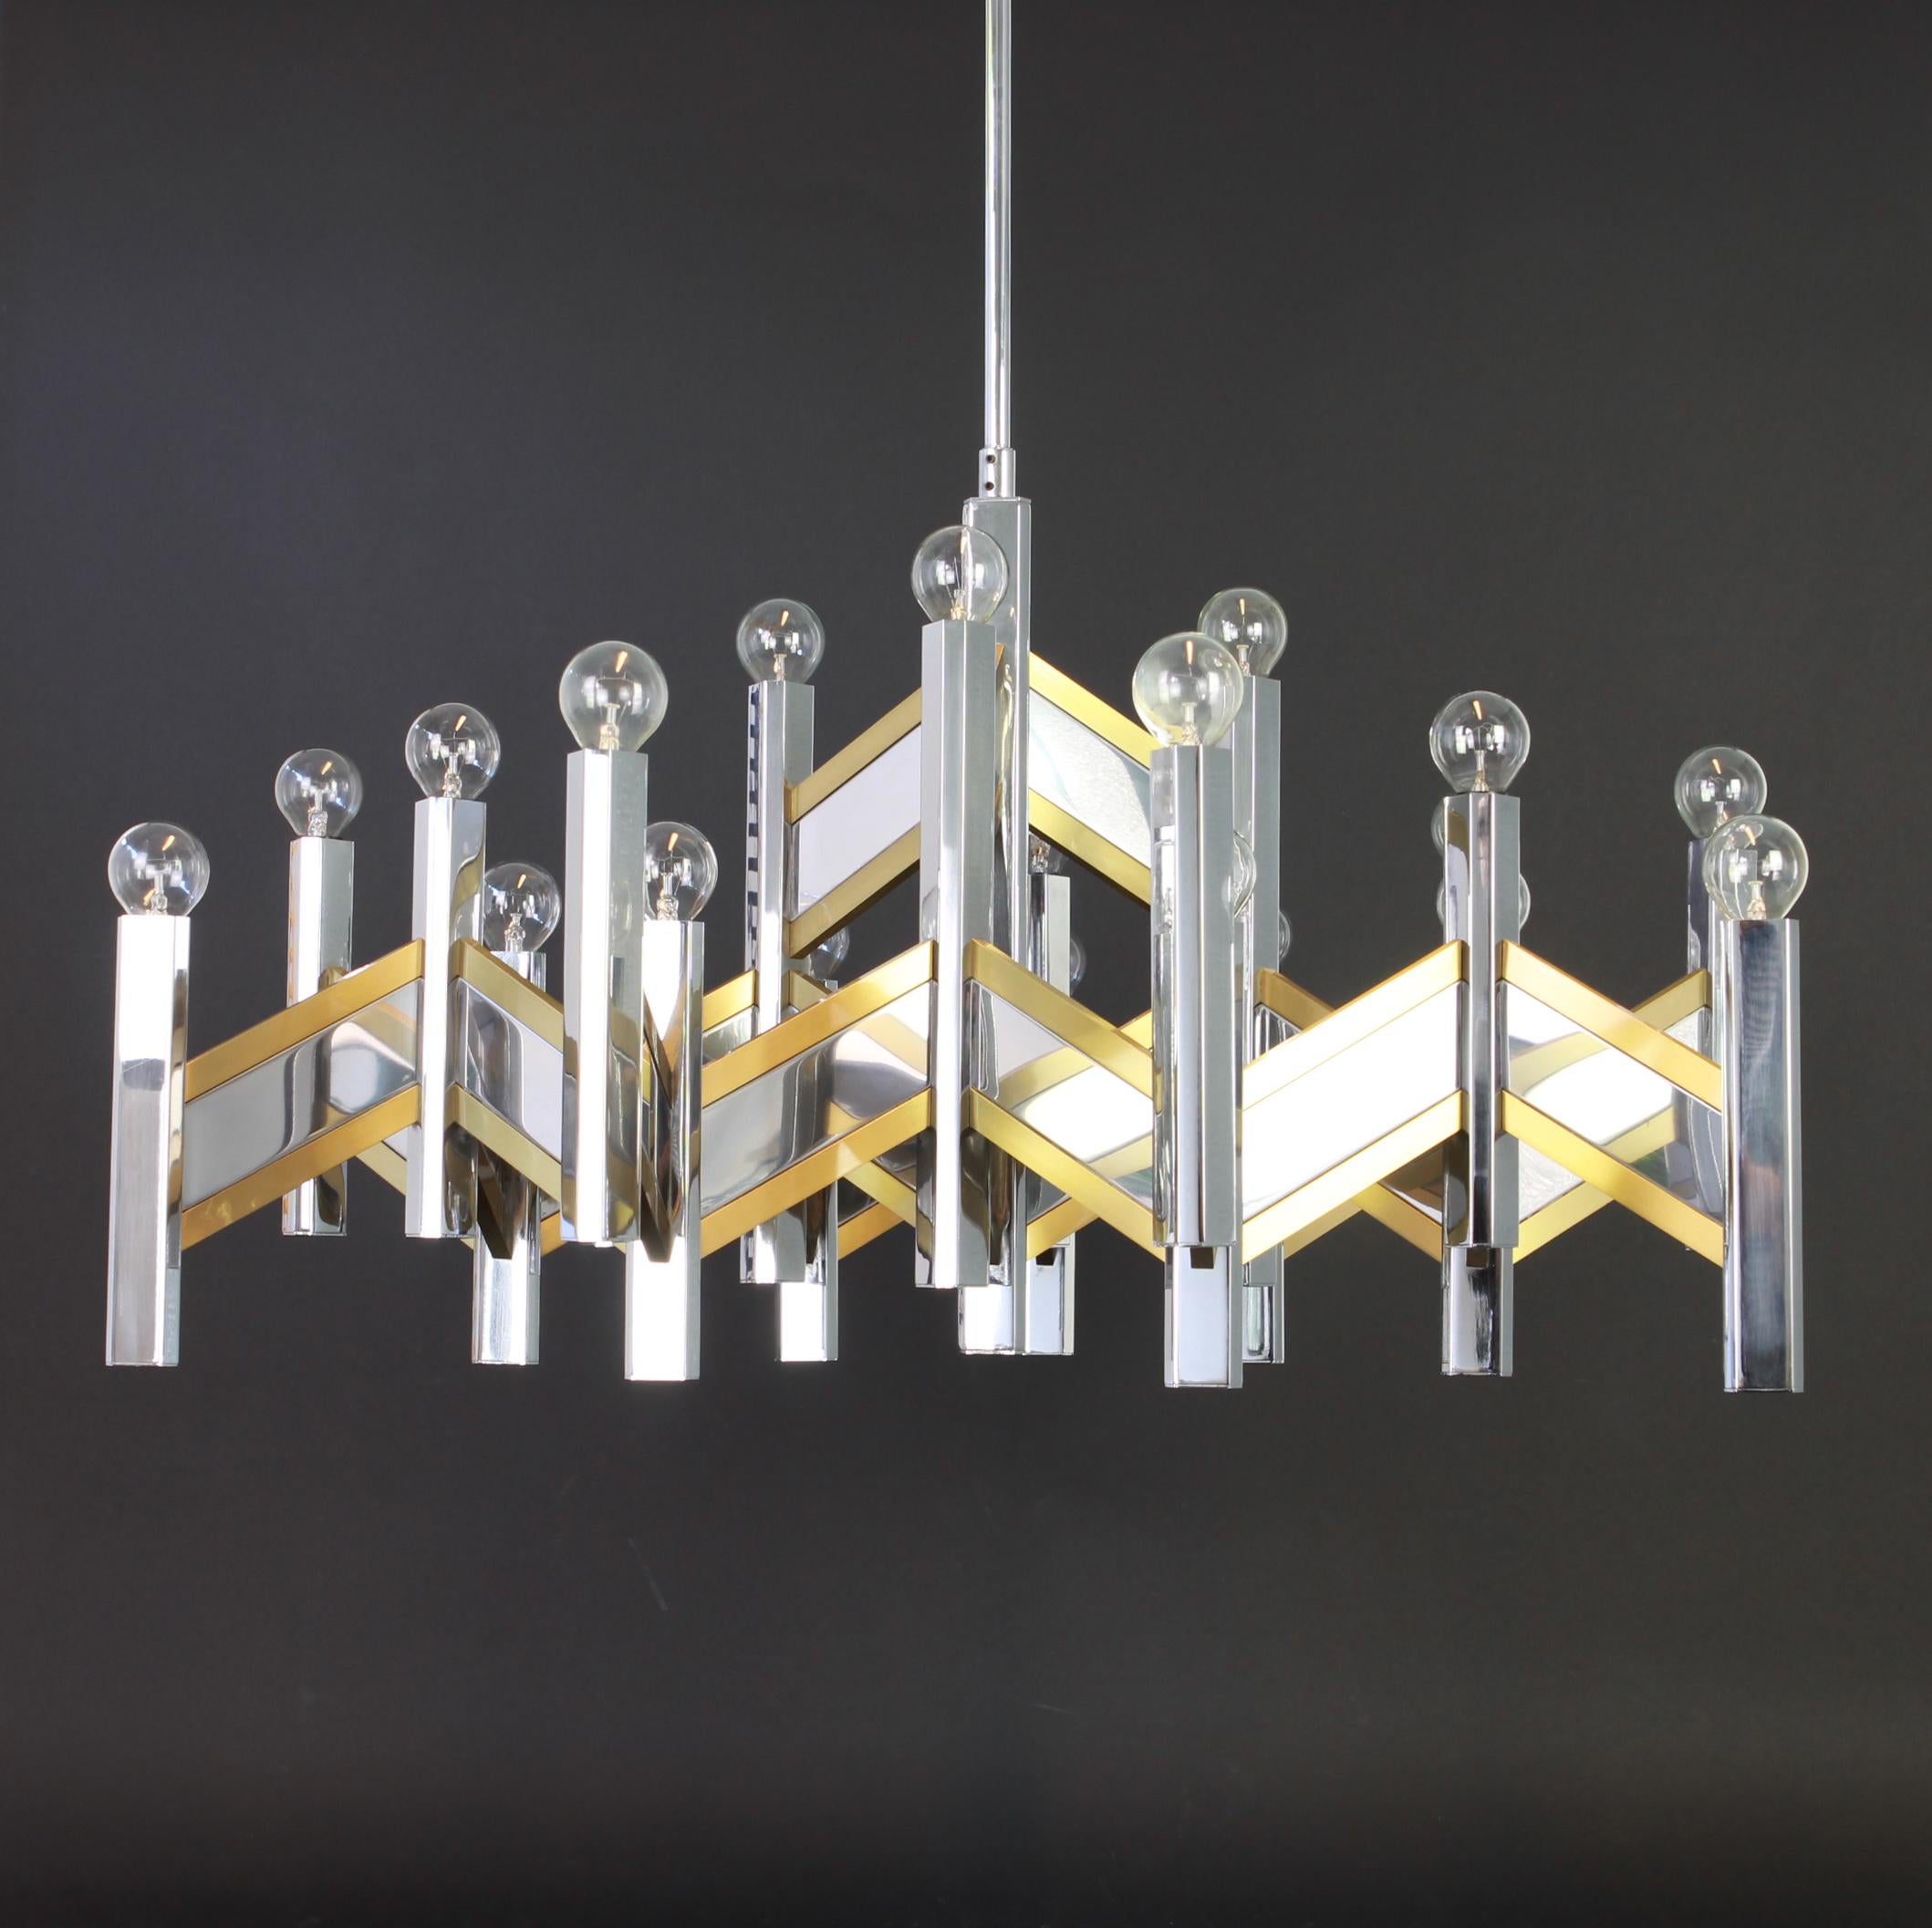 Stunning Huge chandelier designed by Sciolari.
Brush brass and chrome
Best of the 1960s.
High quality and in very good condition. Cleaned, well-wired and ready to use. 

The fixture requires 21 x E14 Standard bulbs with 40W max each and